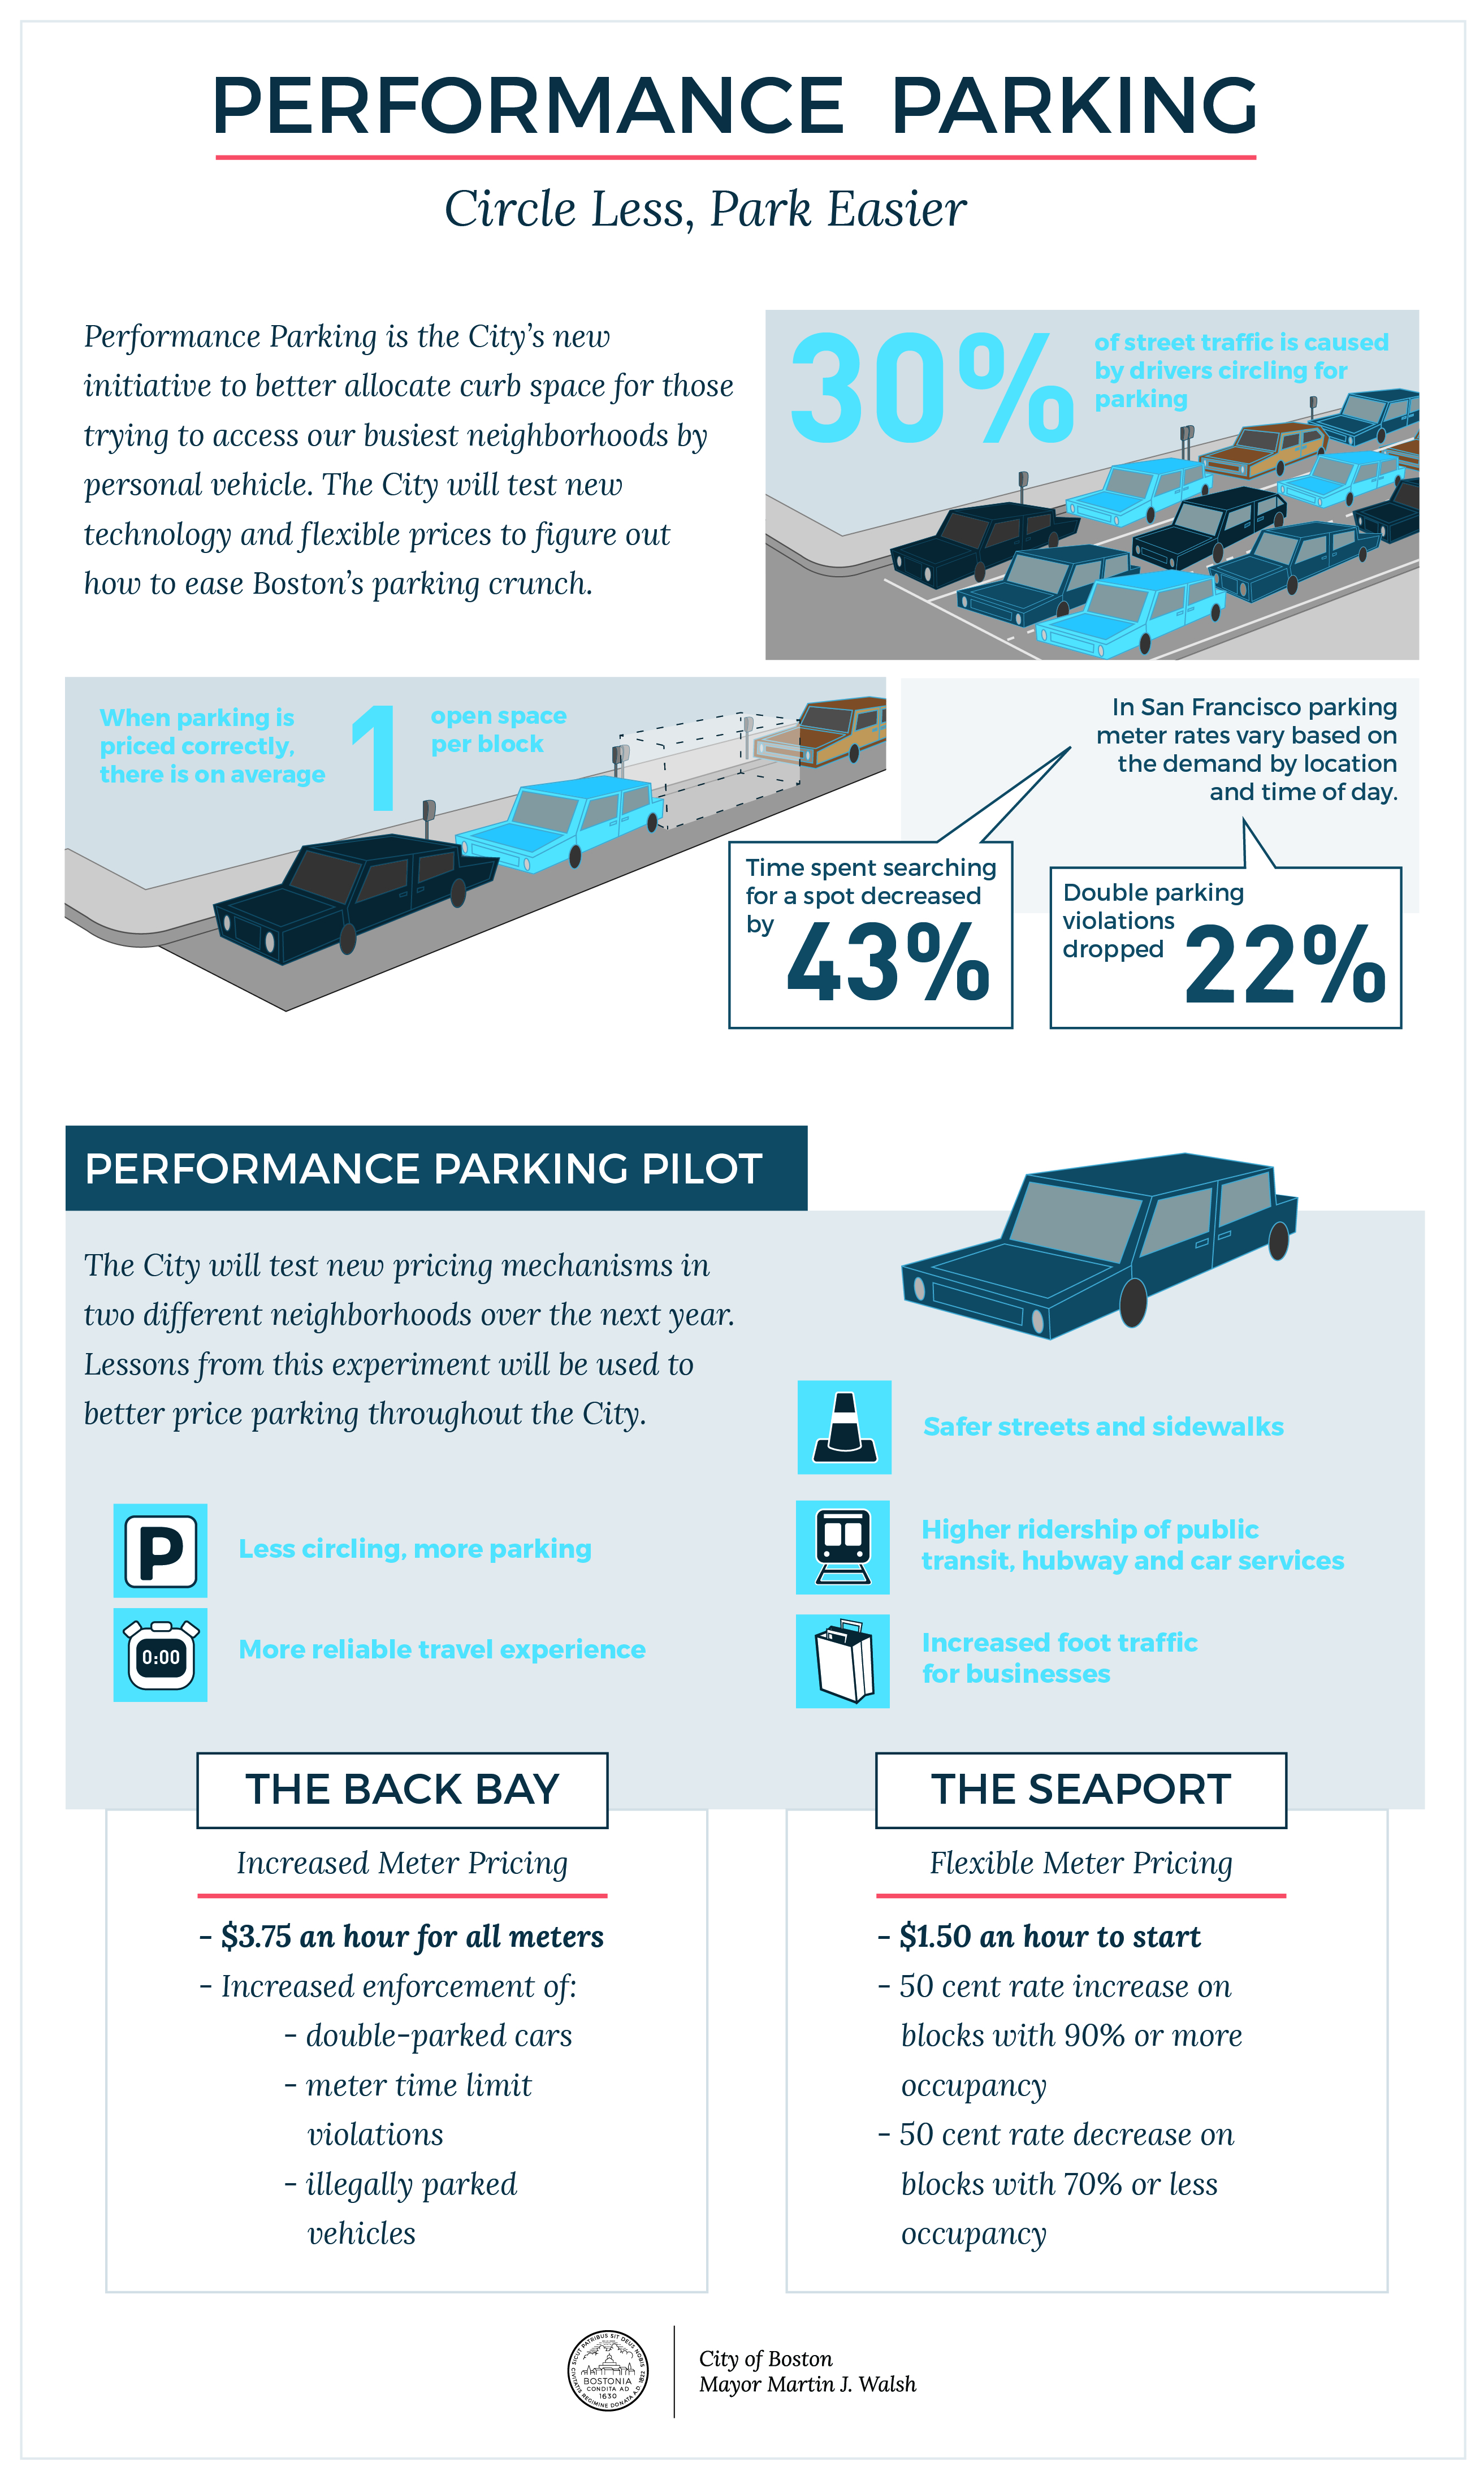 perfparking_infographic-03